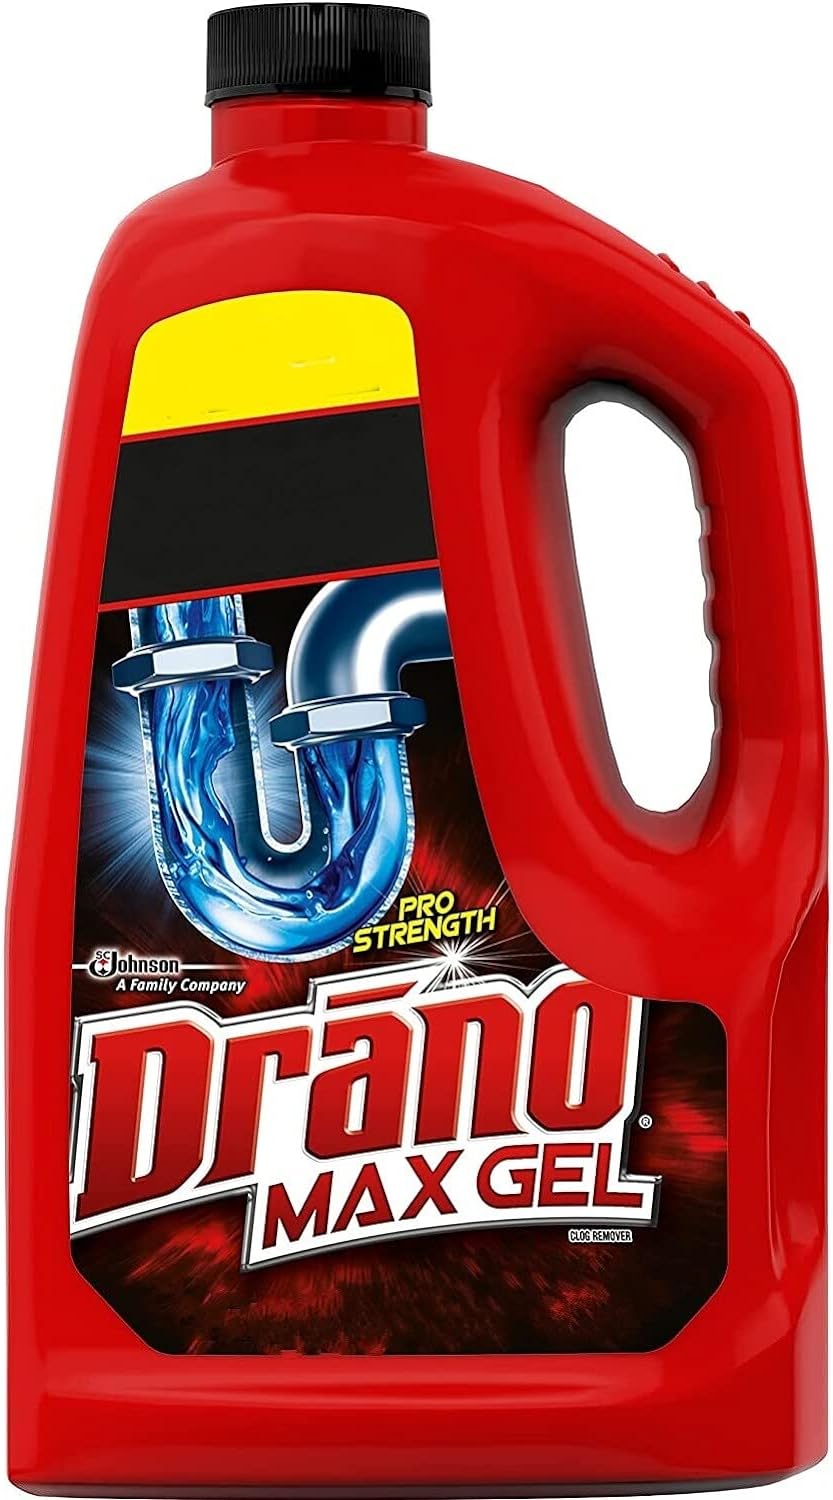 Drano Max Gel Drain Clog Remover and Cleaner for Shower or Sink Drains, 80 oz